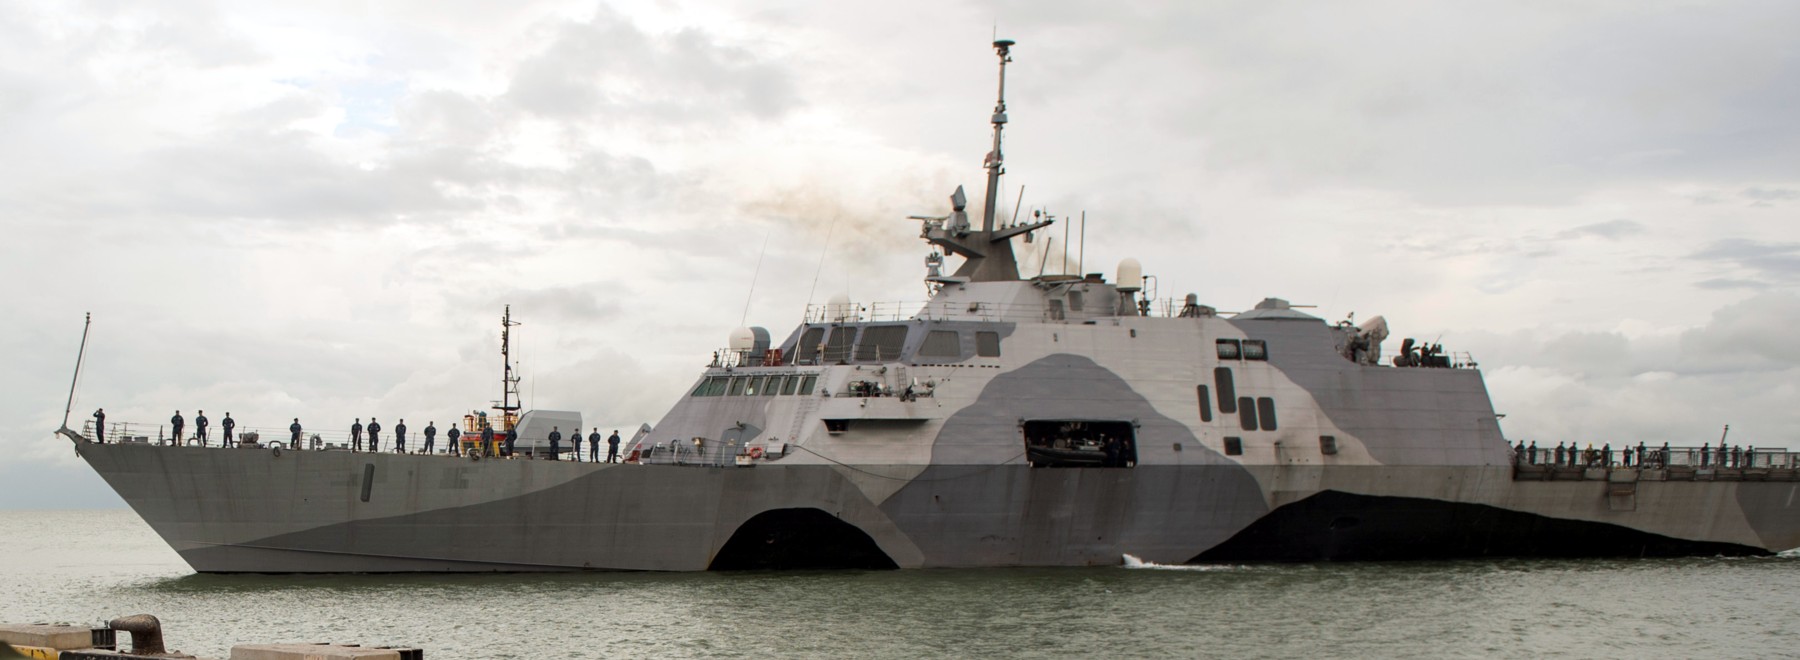 lcs-1 uss freedom class littoral combat ship us navy 20